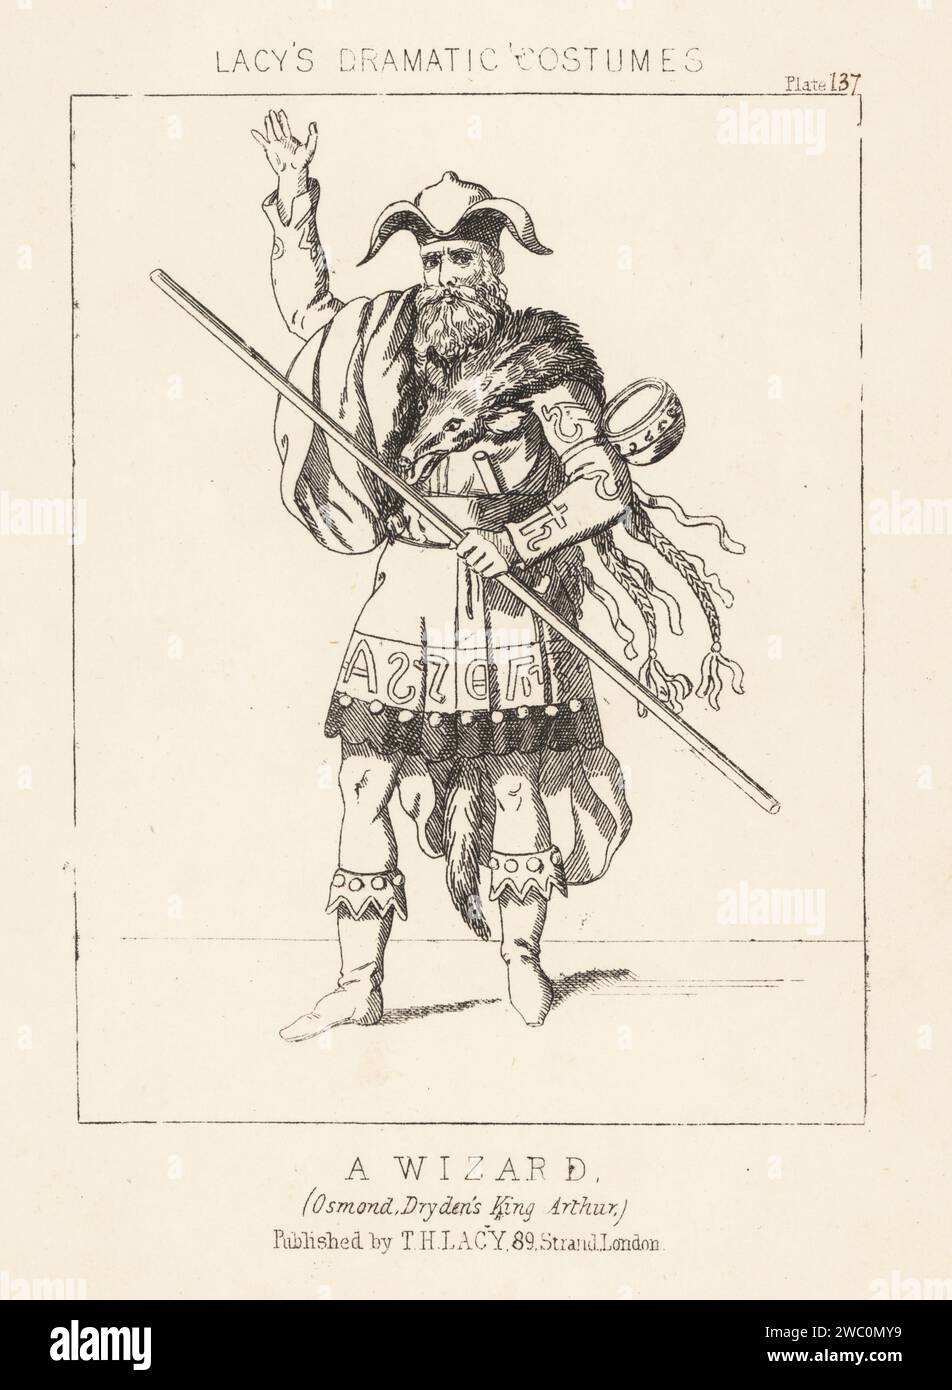 Costume of a wizard or Saxon magician, Osmond, in John Dryden's opera King Arthur. In cap, boarskin, cloak, tunic with Runes, boots, armed with staff. Lithograph from Thomas Hailes Lacy's Male Costumes, Historical, National and Dramatic in 200 Plates, London, 1865. Lacy (1809-1873) was a British actor, playwright, theatrical manager and publisher. Stock Photo